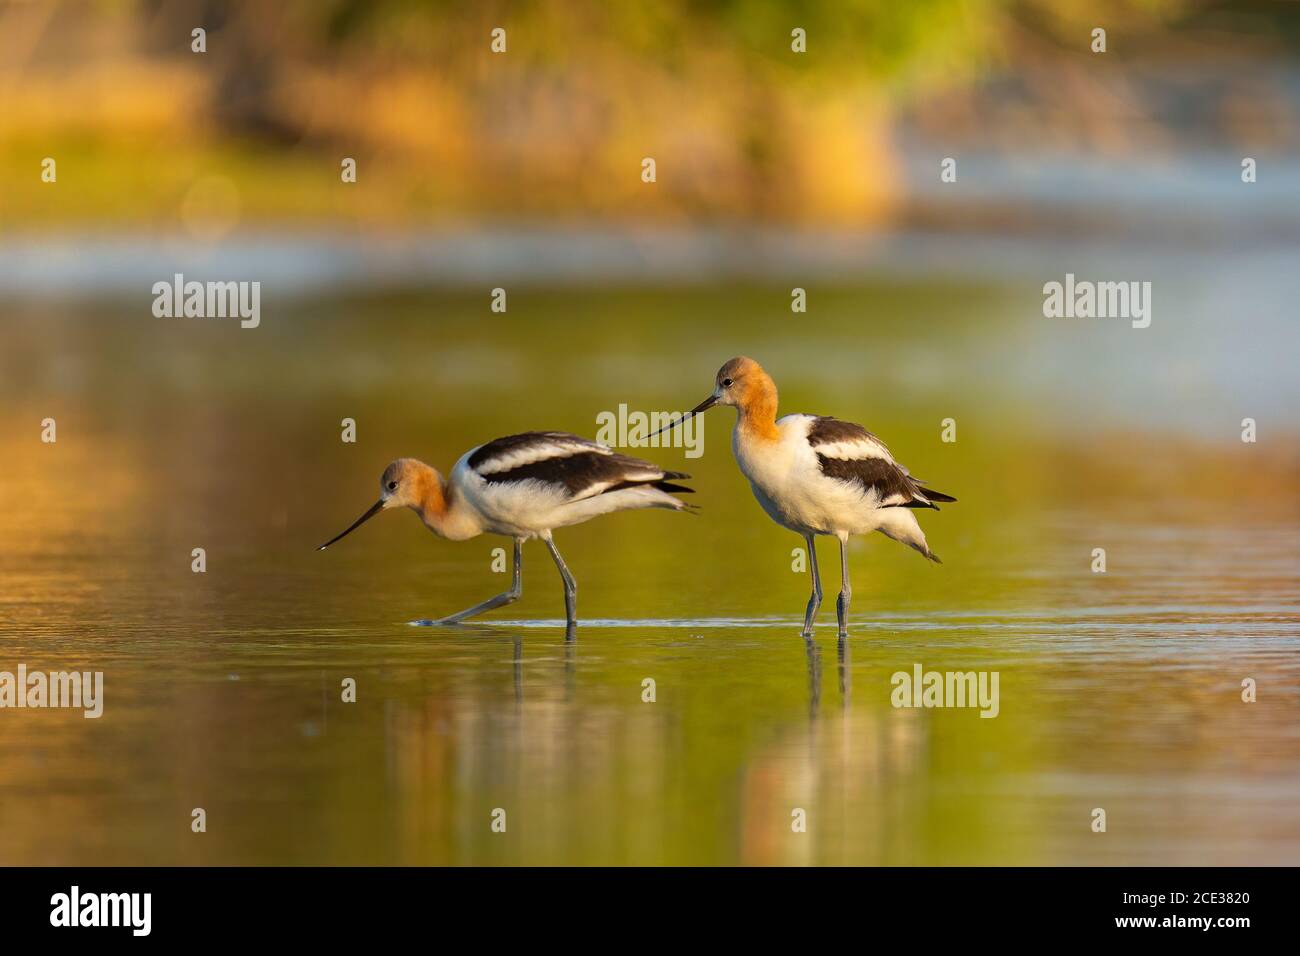 American avocets(Recurvirostra americana) wading in shallow water Stock Photo